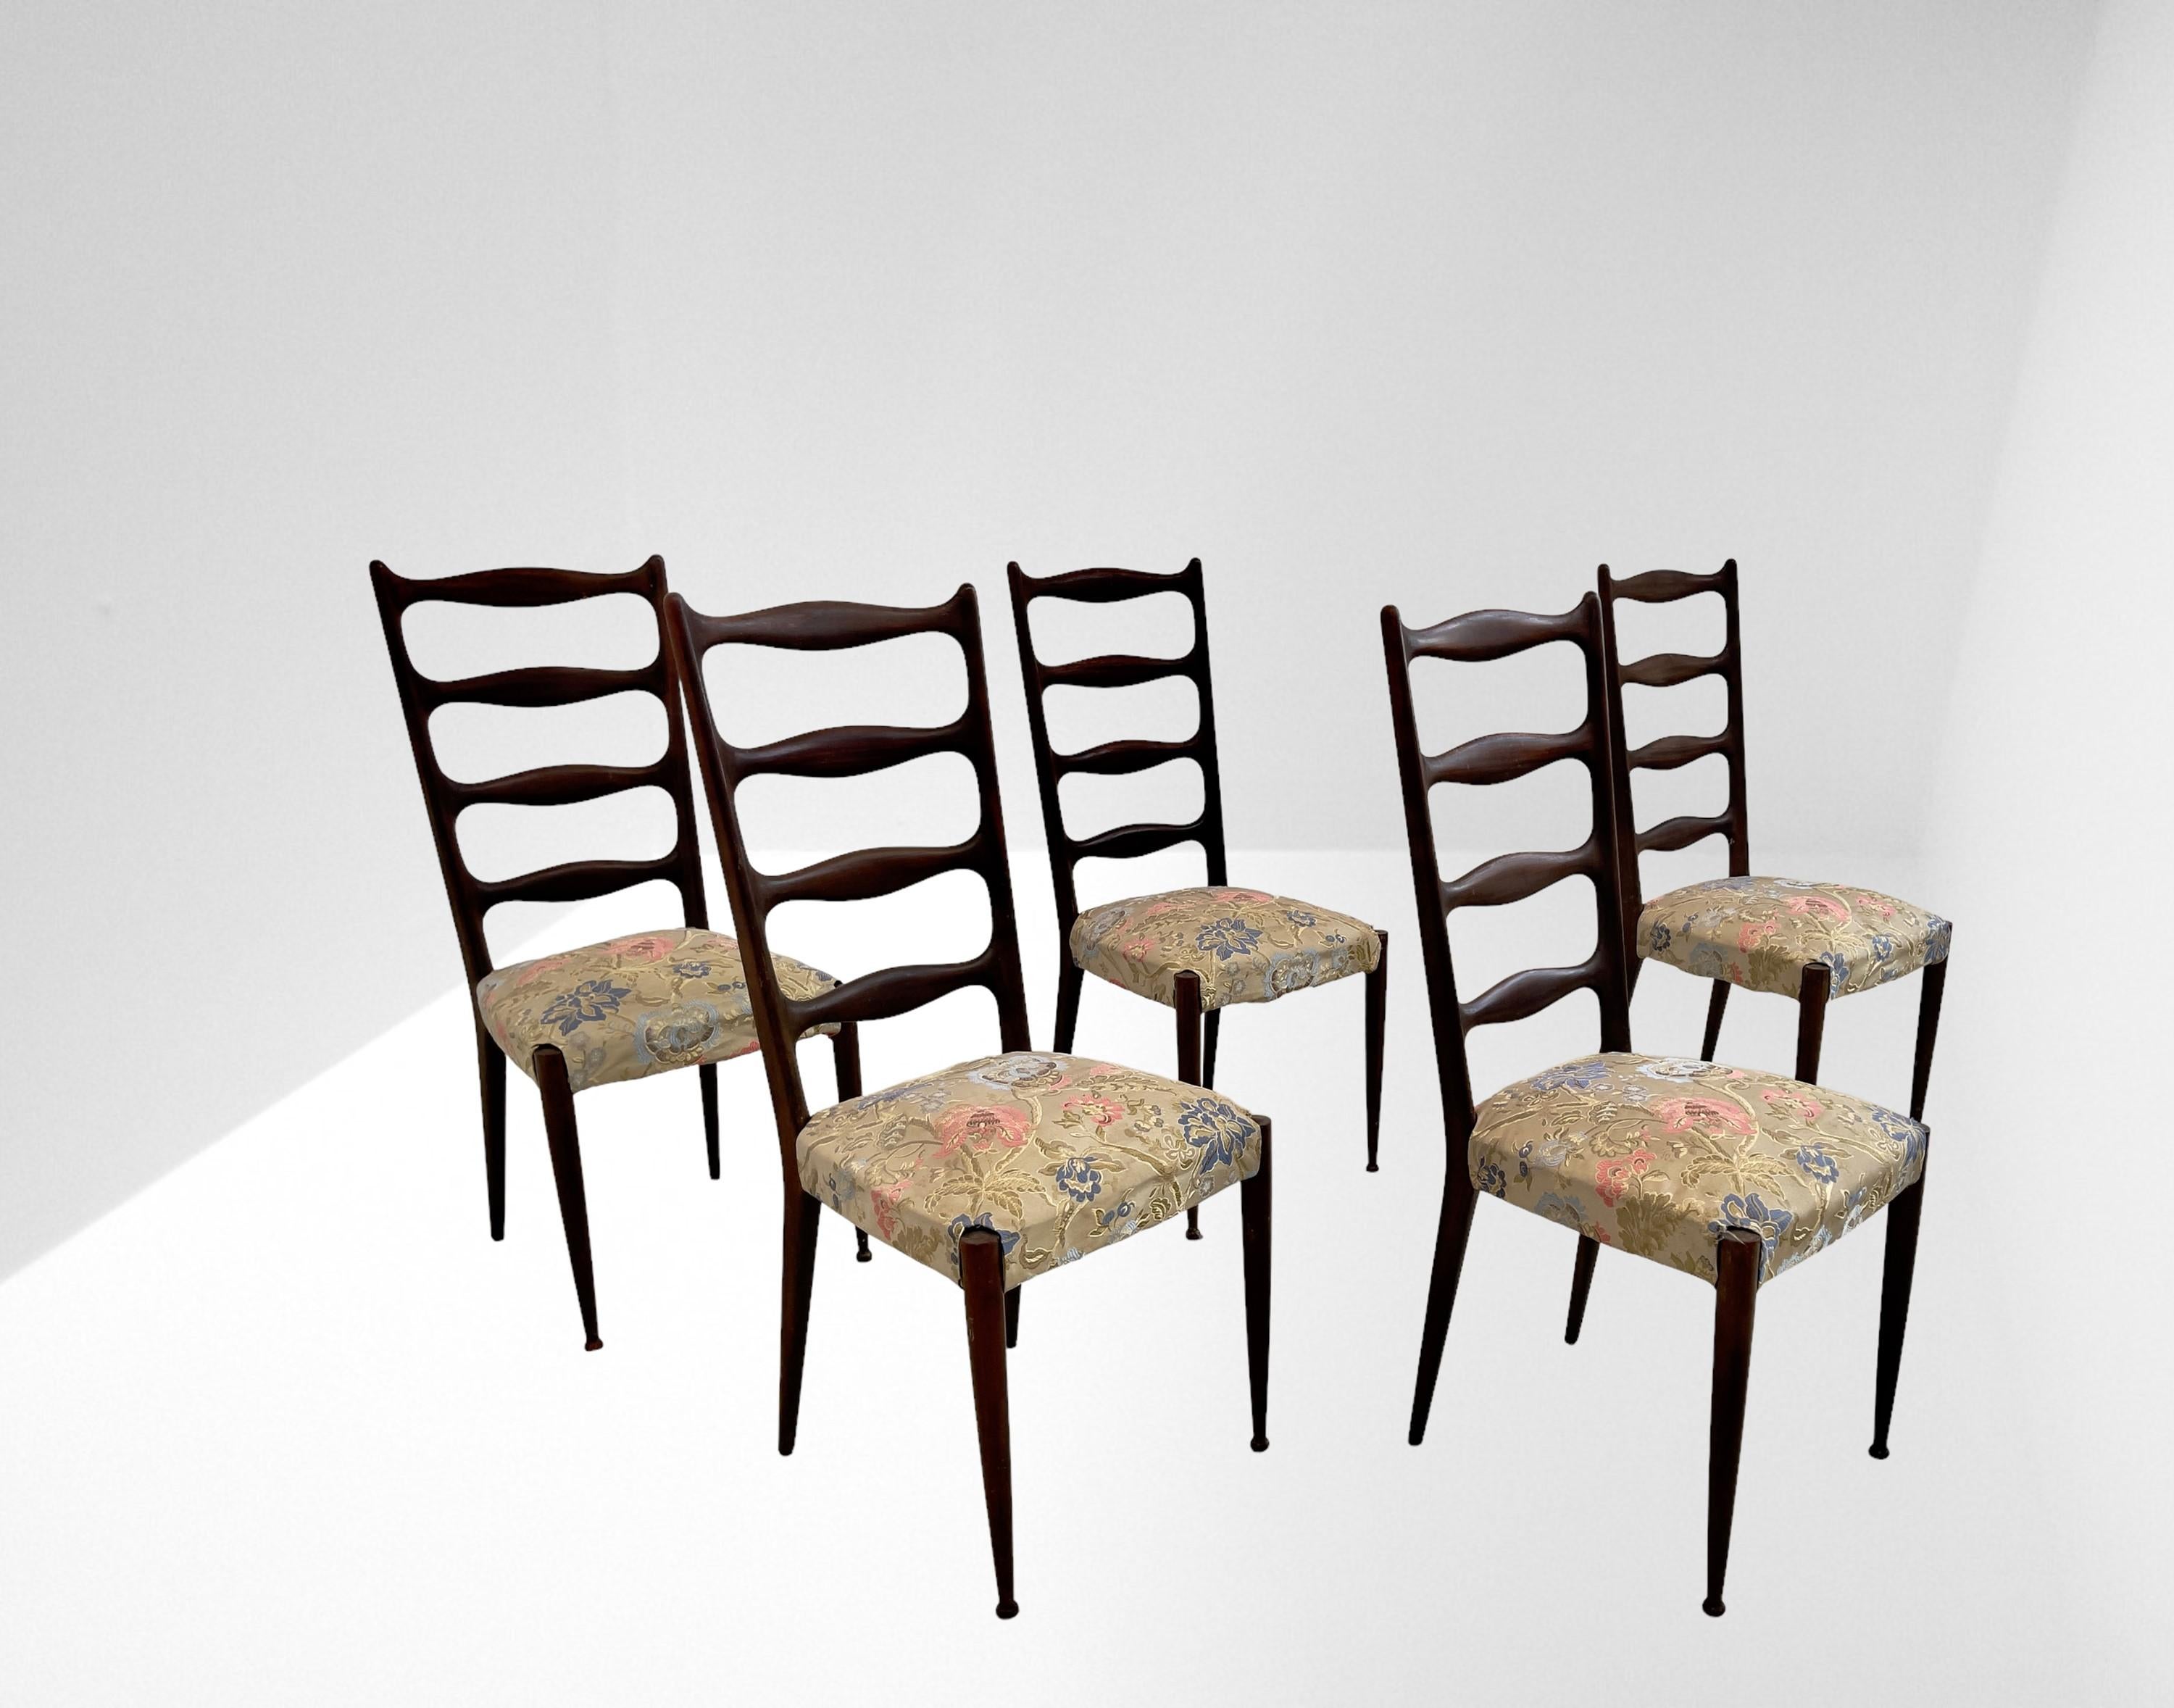 Stunning set of five chairs by Paolo Buffa in mahogany and upholstered fabric. Italian manufacture. C1950s.